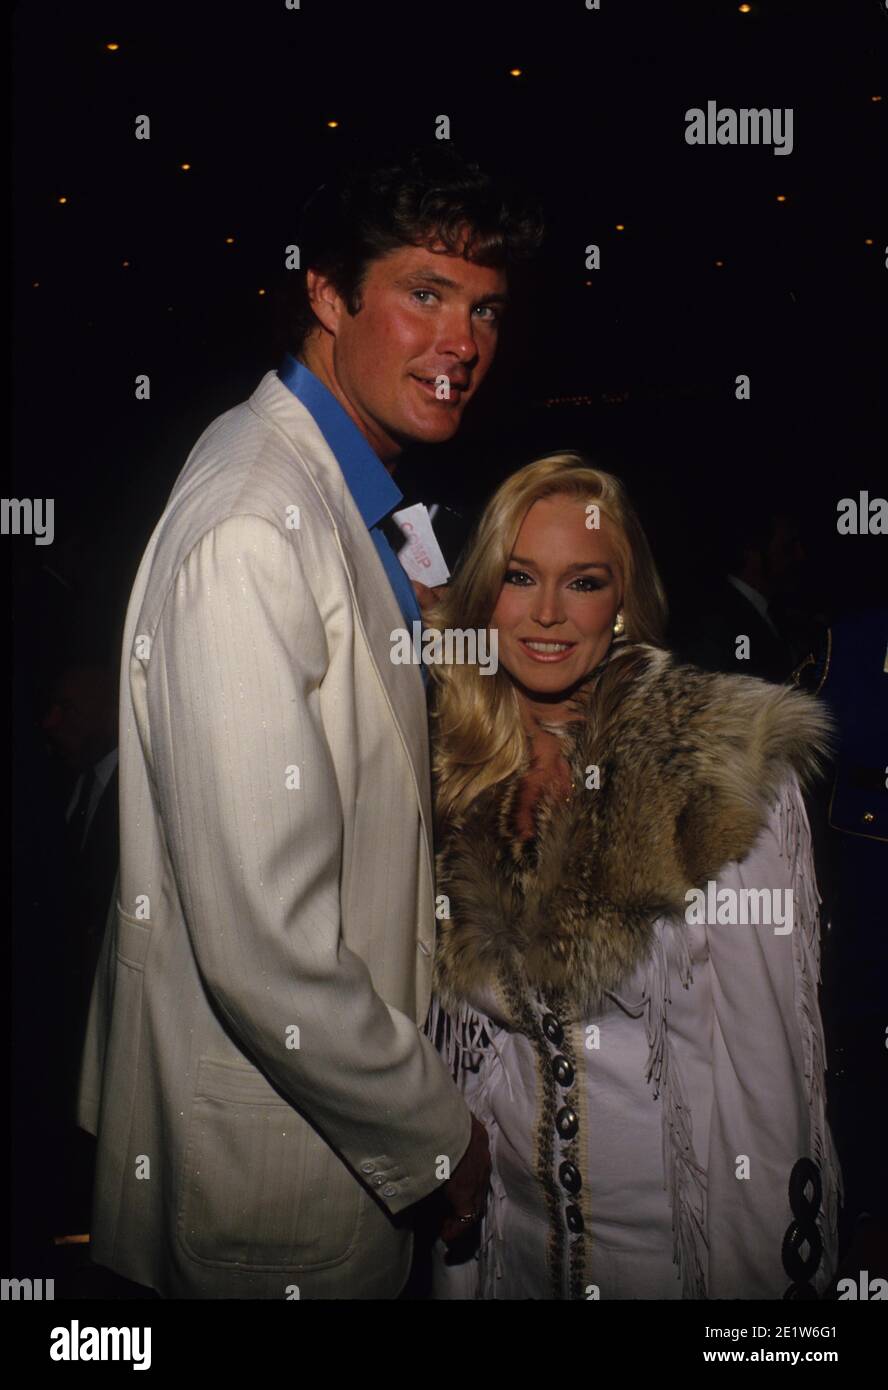 Hickland pictures catherine Catherine Hickland